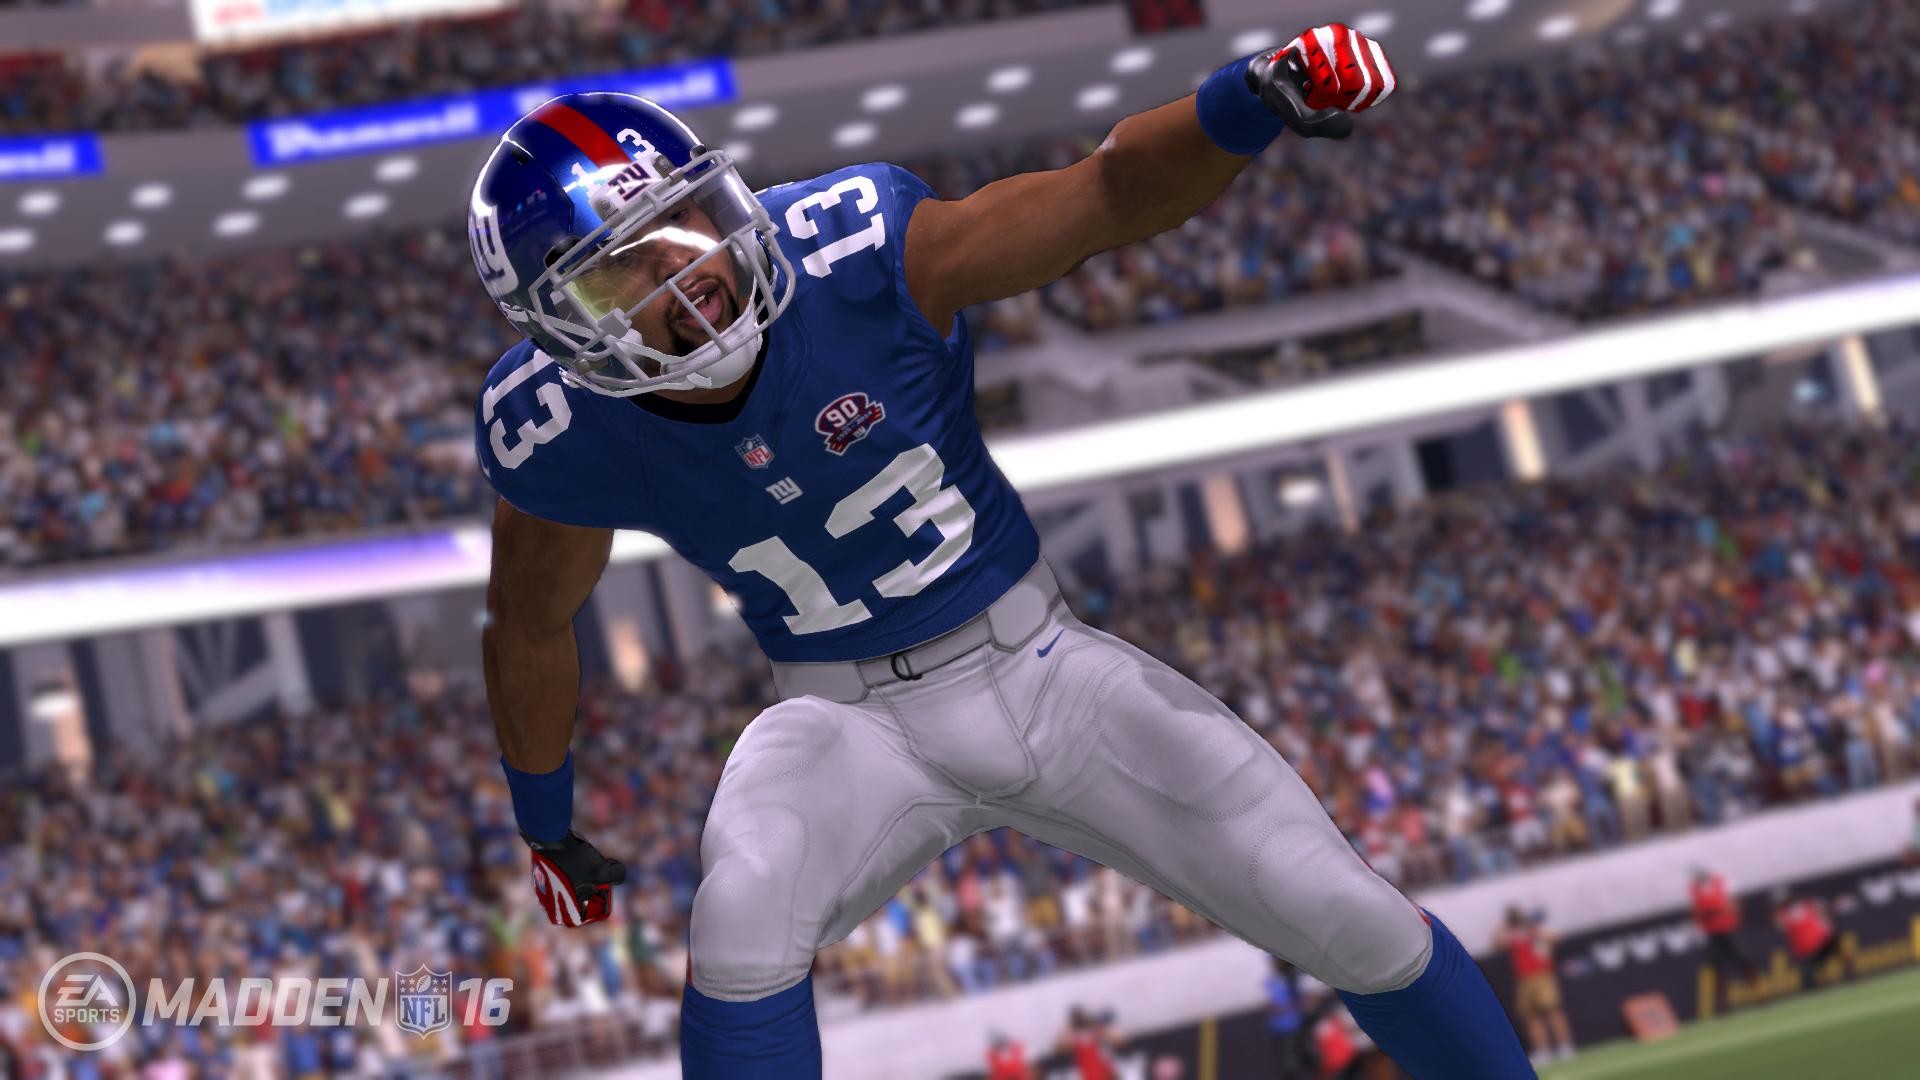 1920x1080 Madden NFL 16 HD Wallpapers